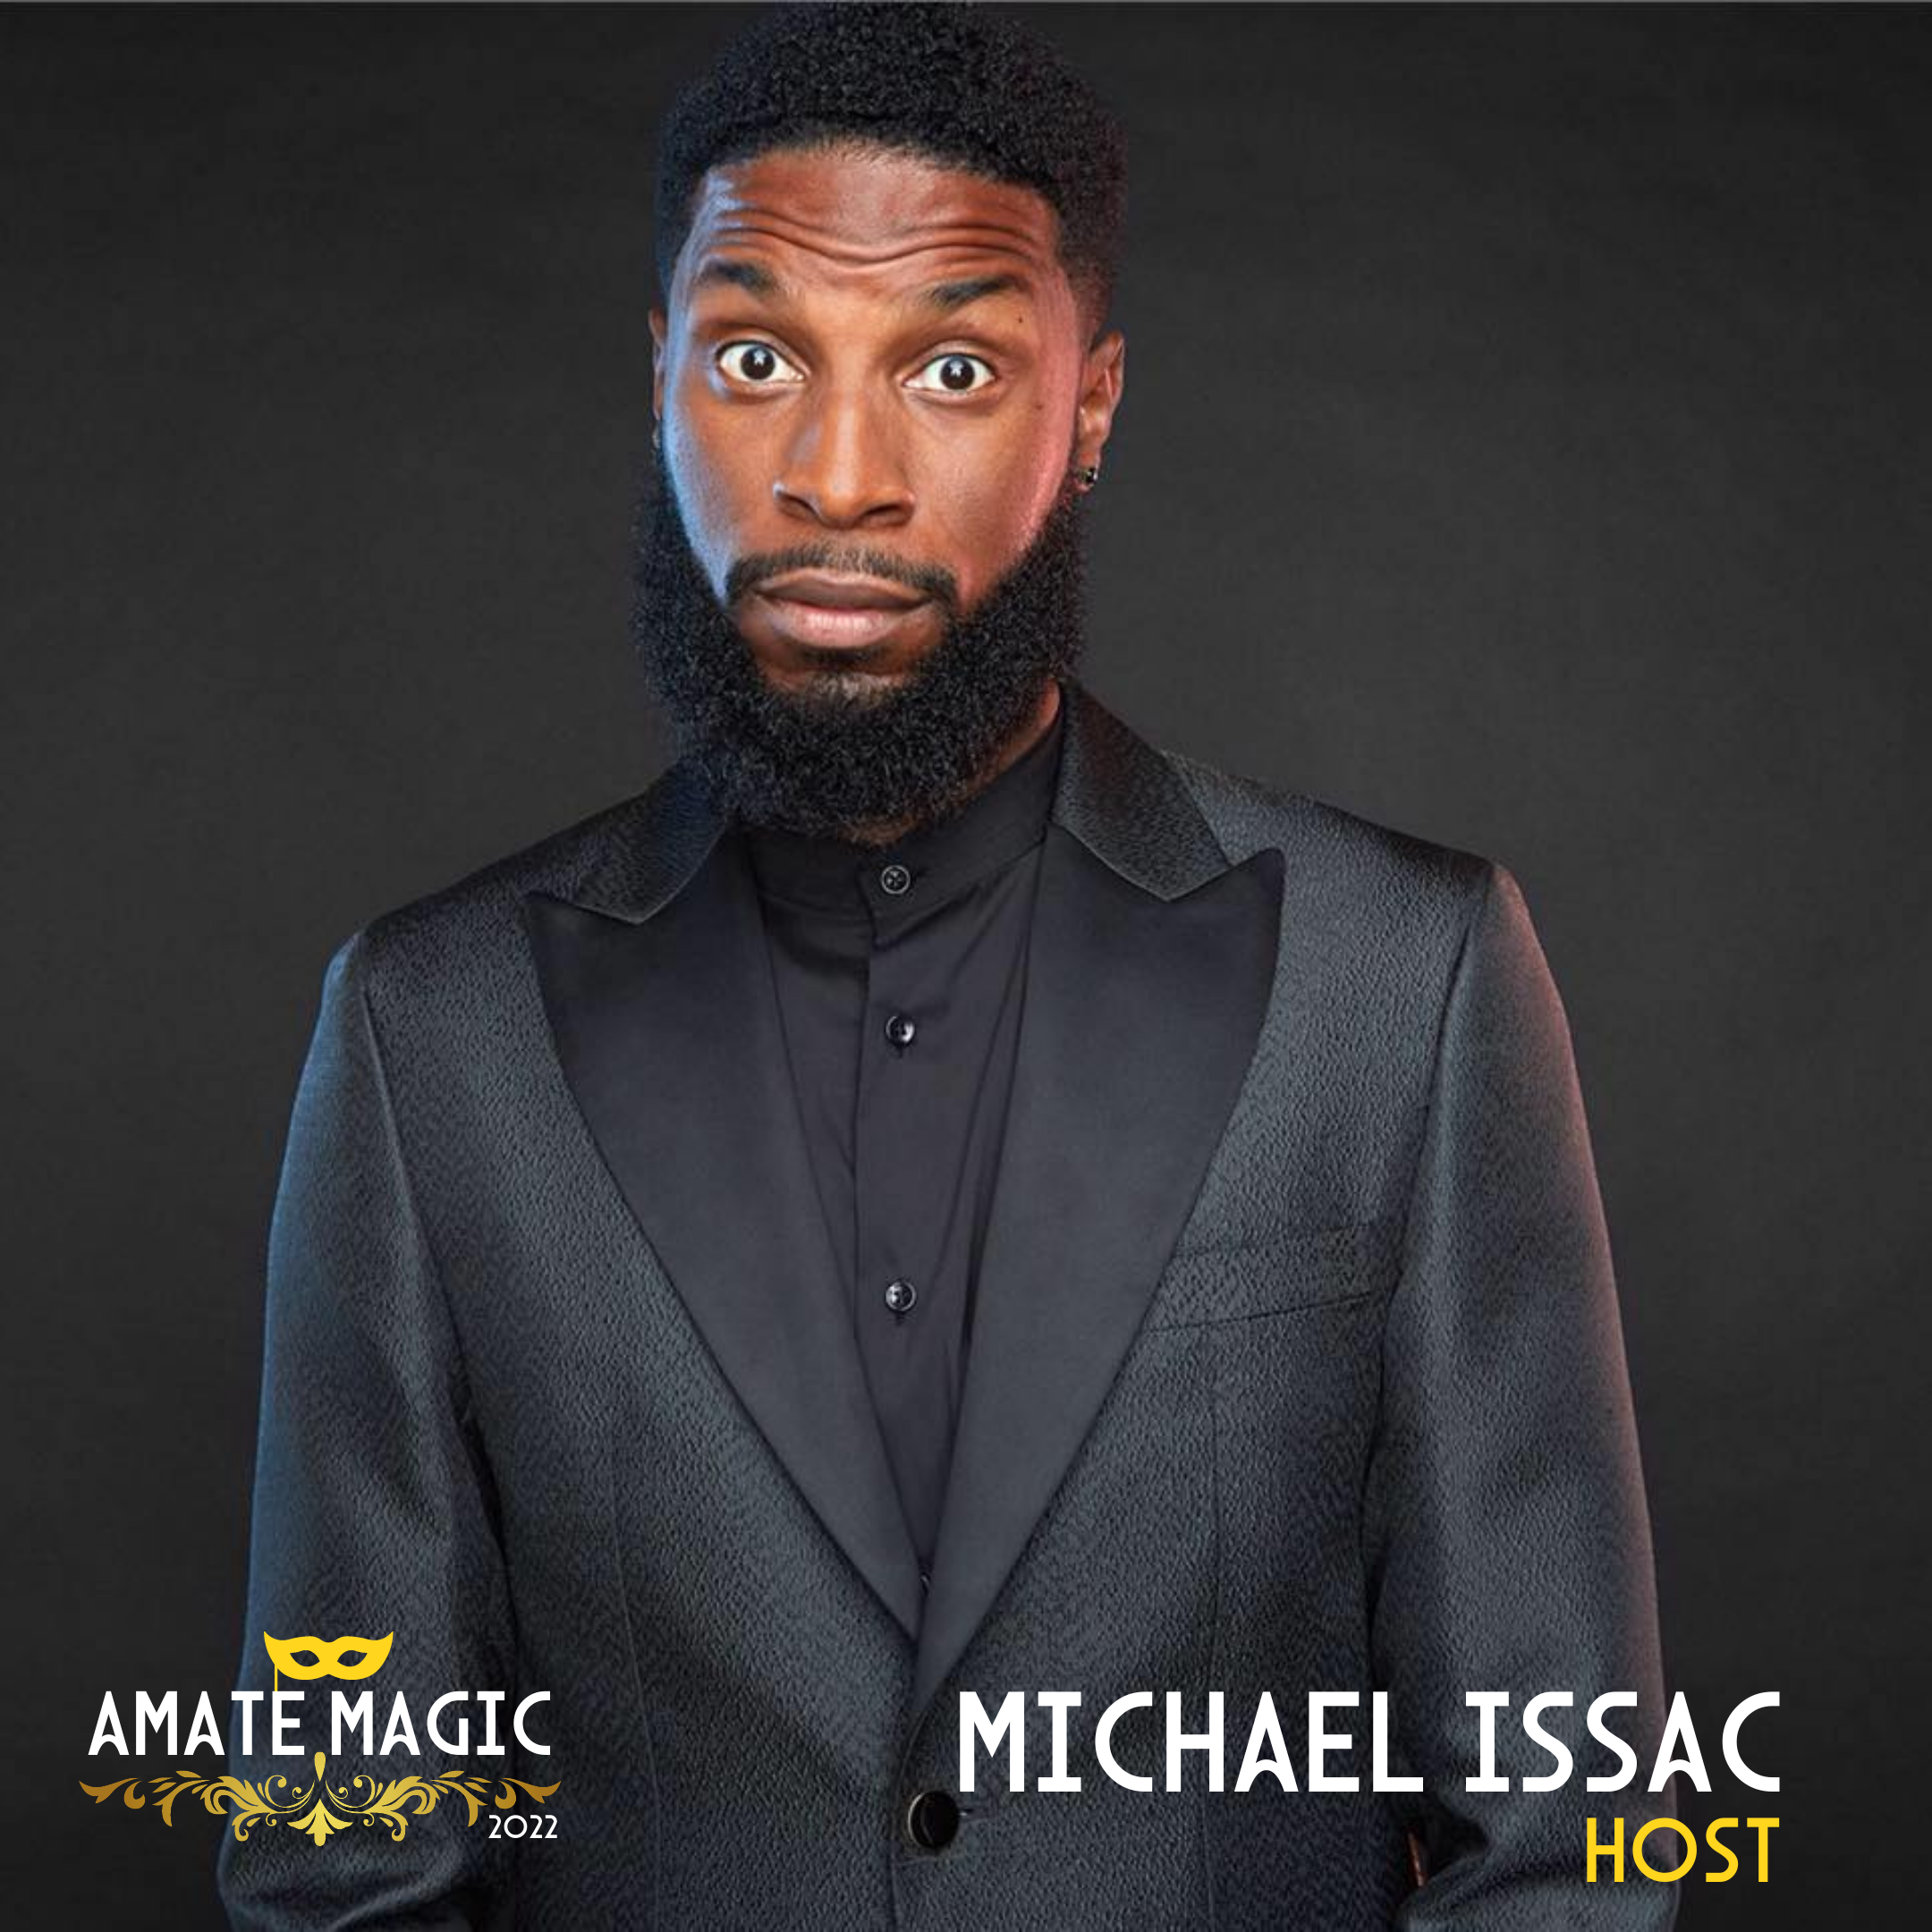 He’s back! Celebrate Amate House with Zanies legend, Michael Issac!